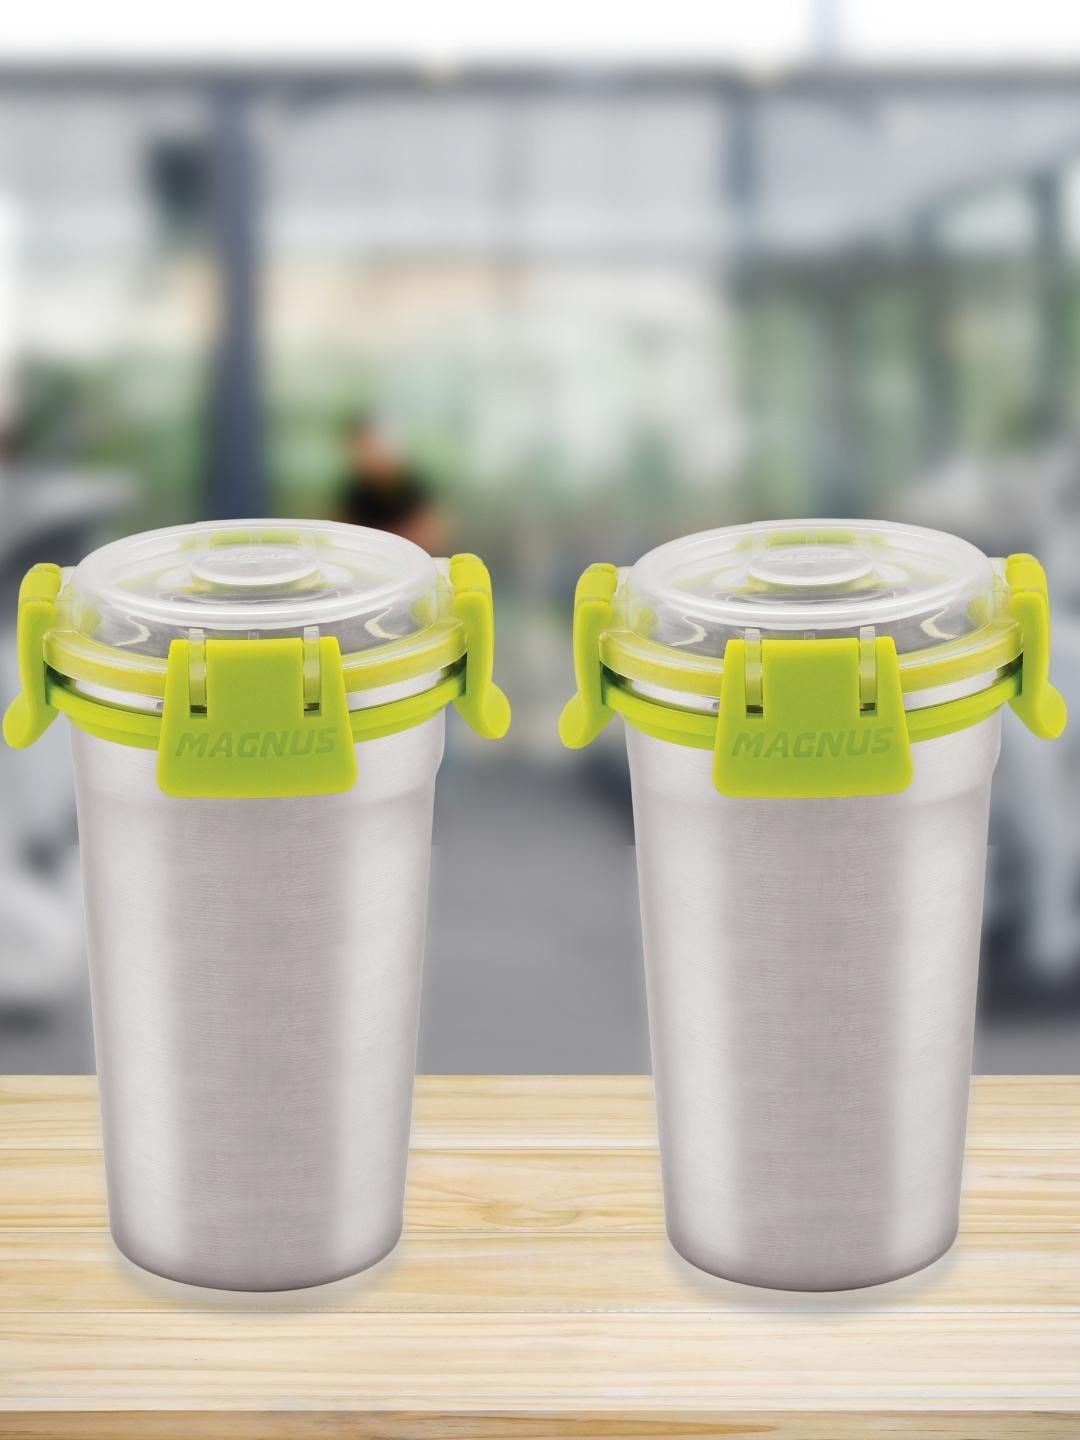 MAGNUS Set of 2 Silver-Toned & Green Solid Leakproof Stainless Steel Matte Mugs Price in India